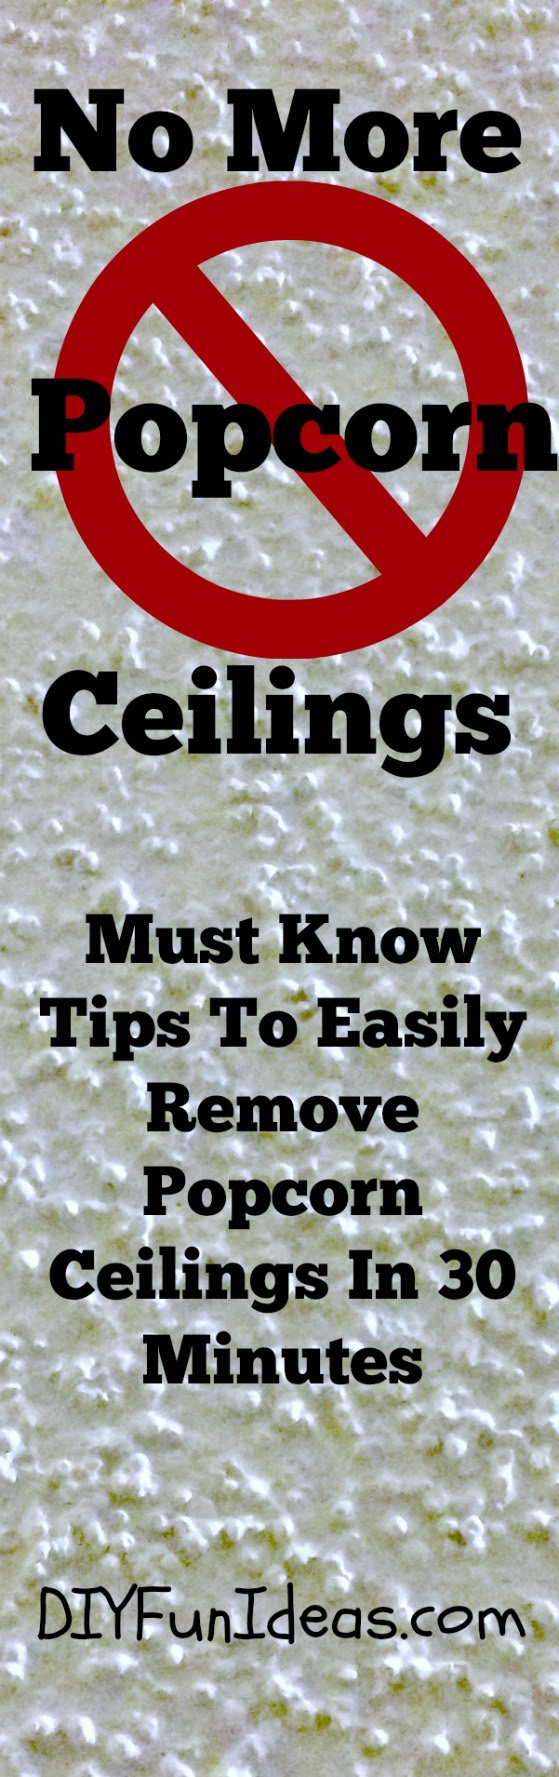 How To Remove Popcorn Ceilings in 30 MInutes Plus Super Easy Clean-up